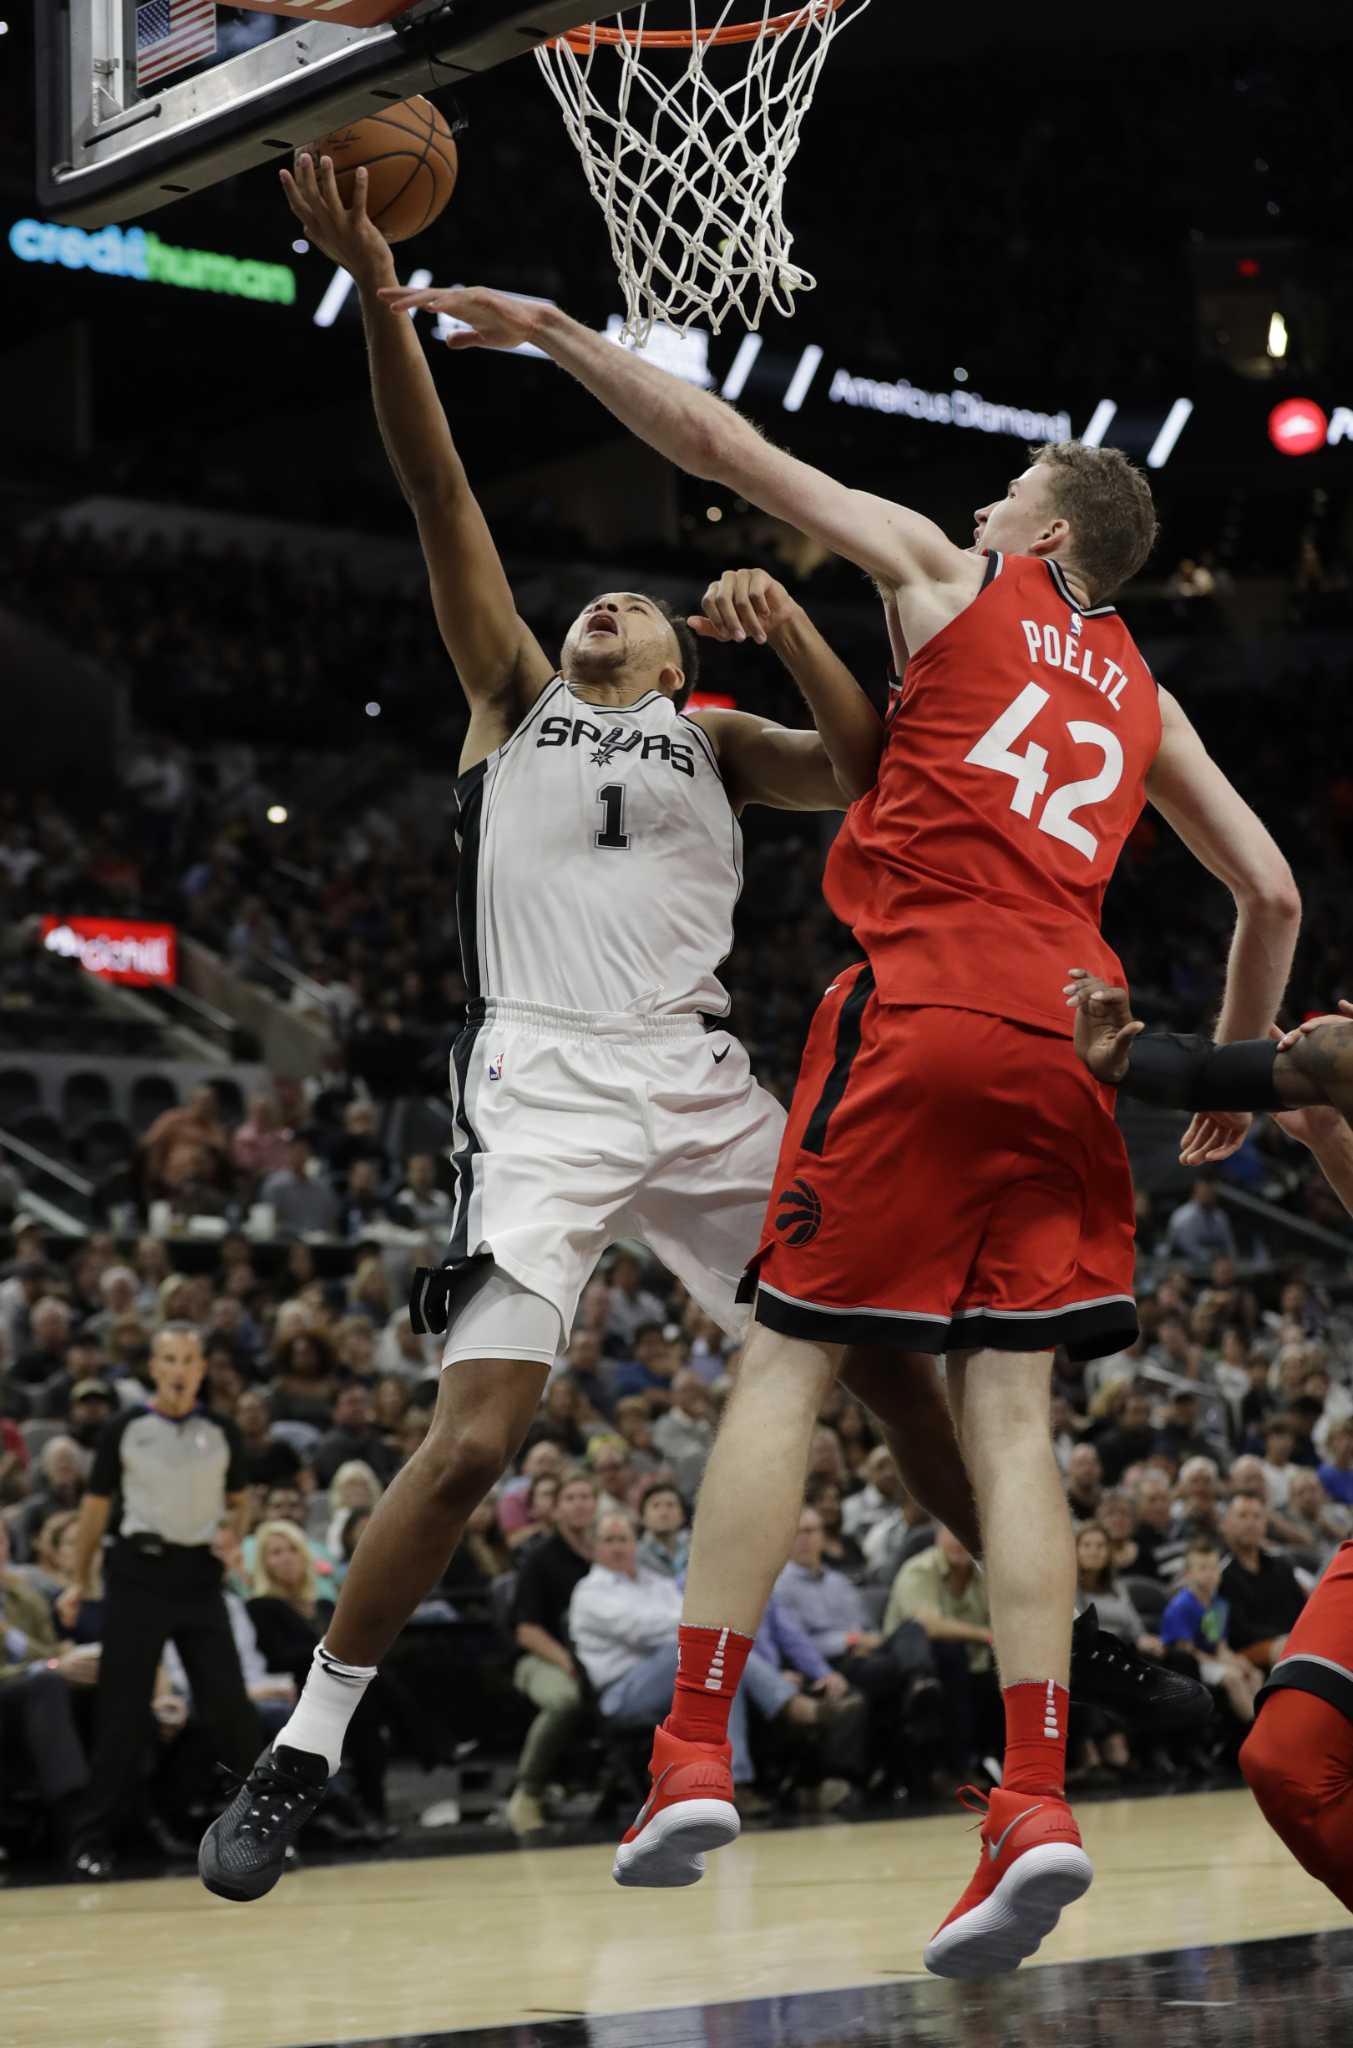 Anderson signs Grizzlies offer sheet, setting stage for Spurs exit